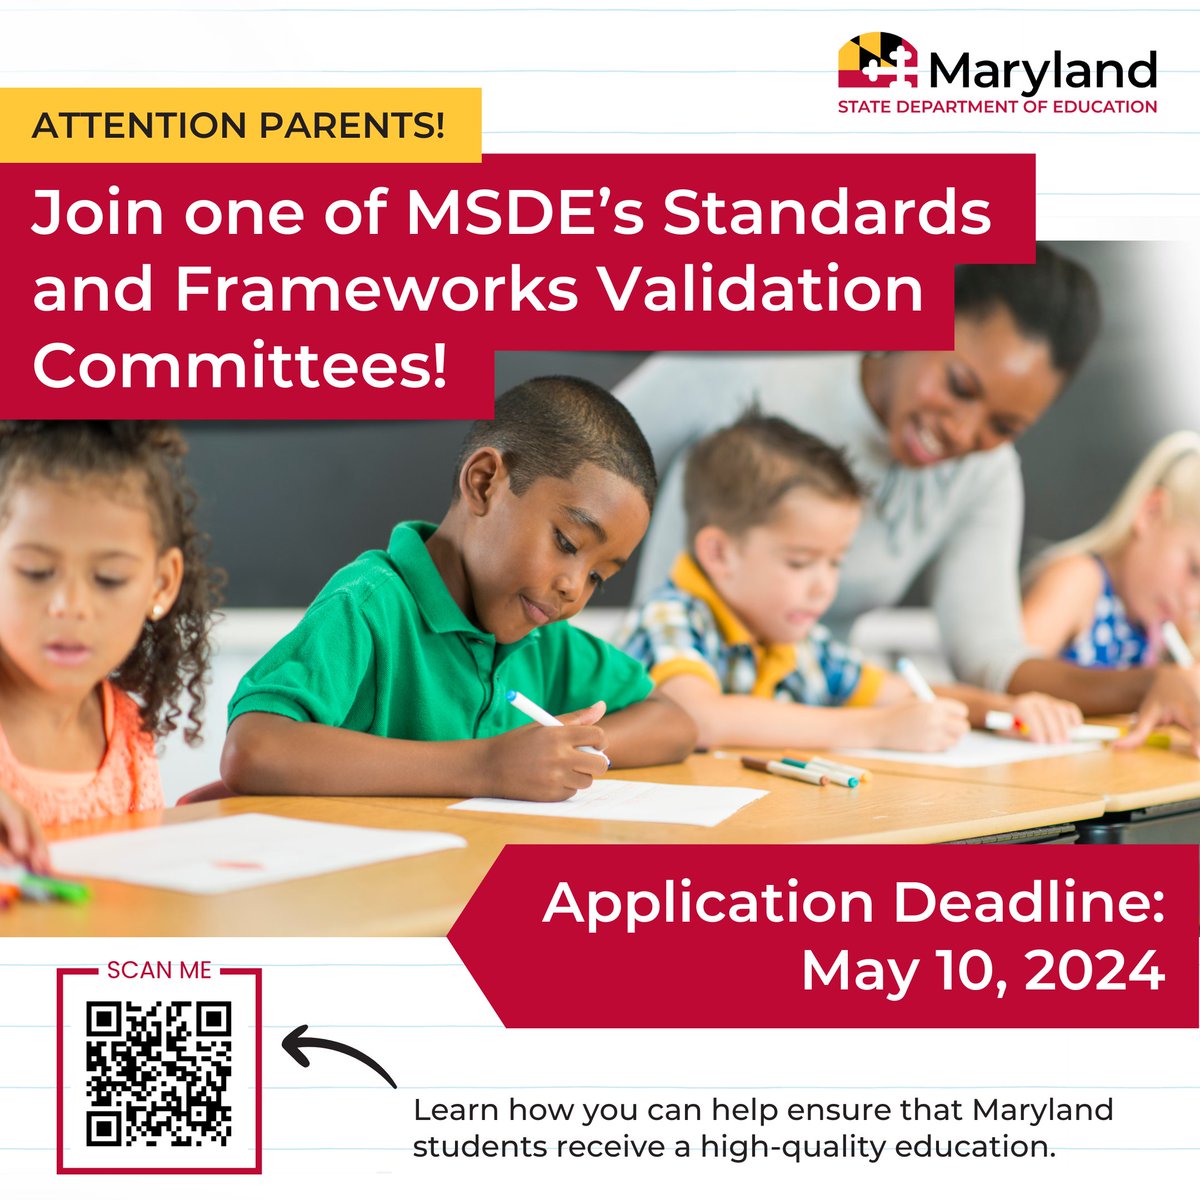 Parents, your voice is crucial in shaping MD's curricular resources. Join one of the Standards & Frameworks Validation Committees (SFVC) to ensure that our standards & frameworks align with the needs of our students. Apply now: forms.office.com/r/MZCPCJTeY6